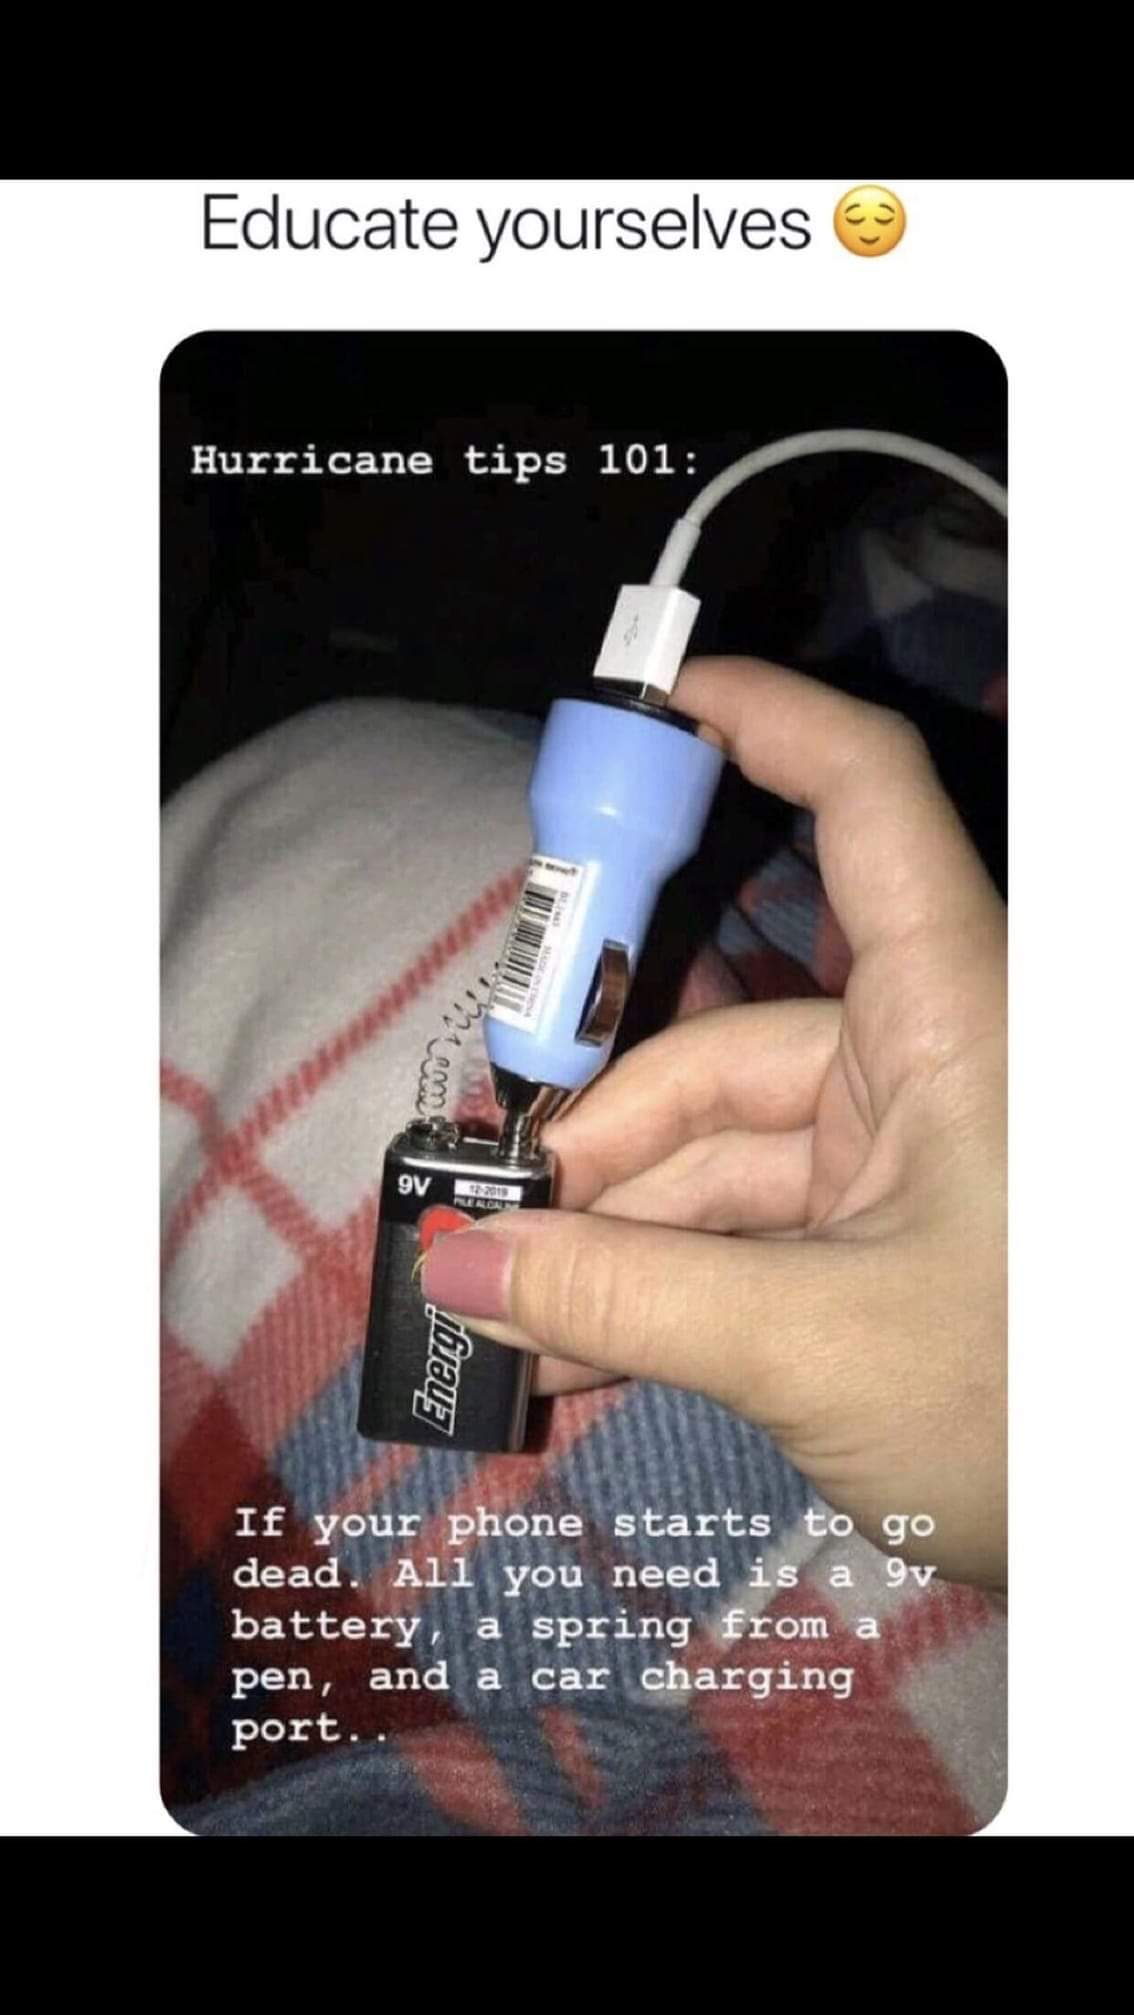 hurricane meme florence - Educate yourselves Hurricane tips 101 24 nne 9V Energi If your phone starts to go dead. All you need is a 9v battery a spring from a pen, and a car charging port..